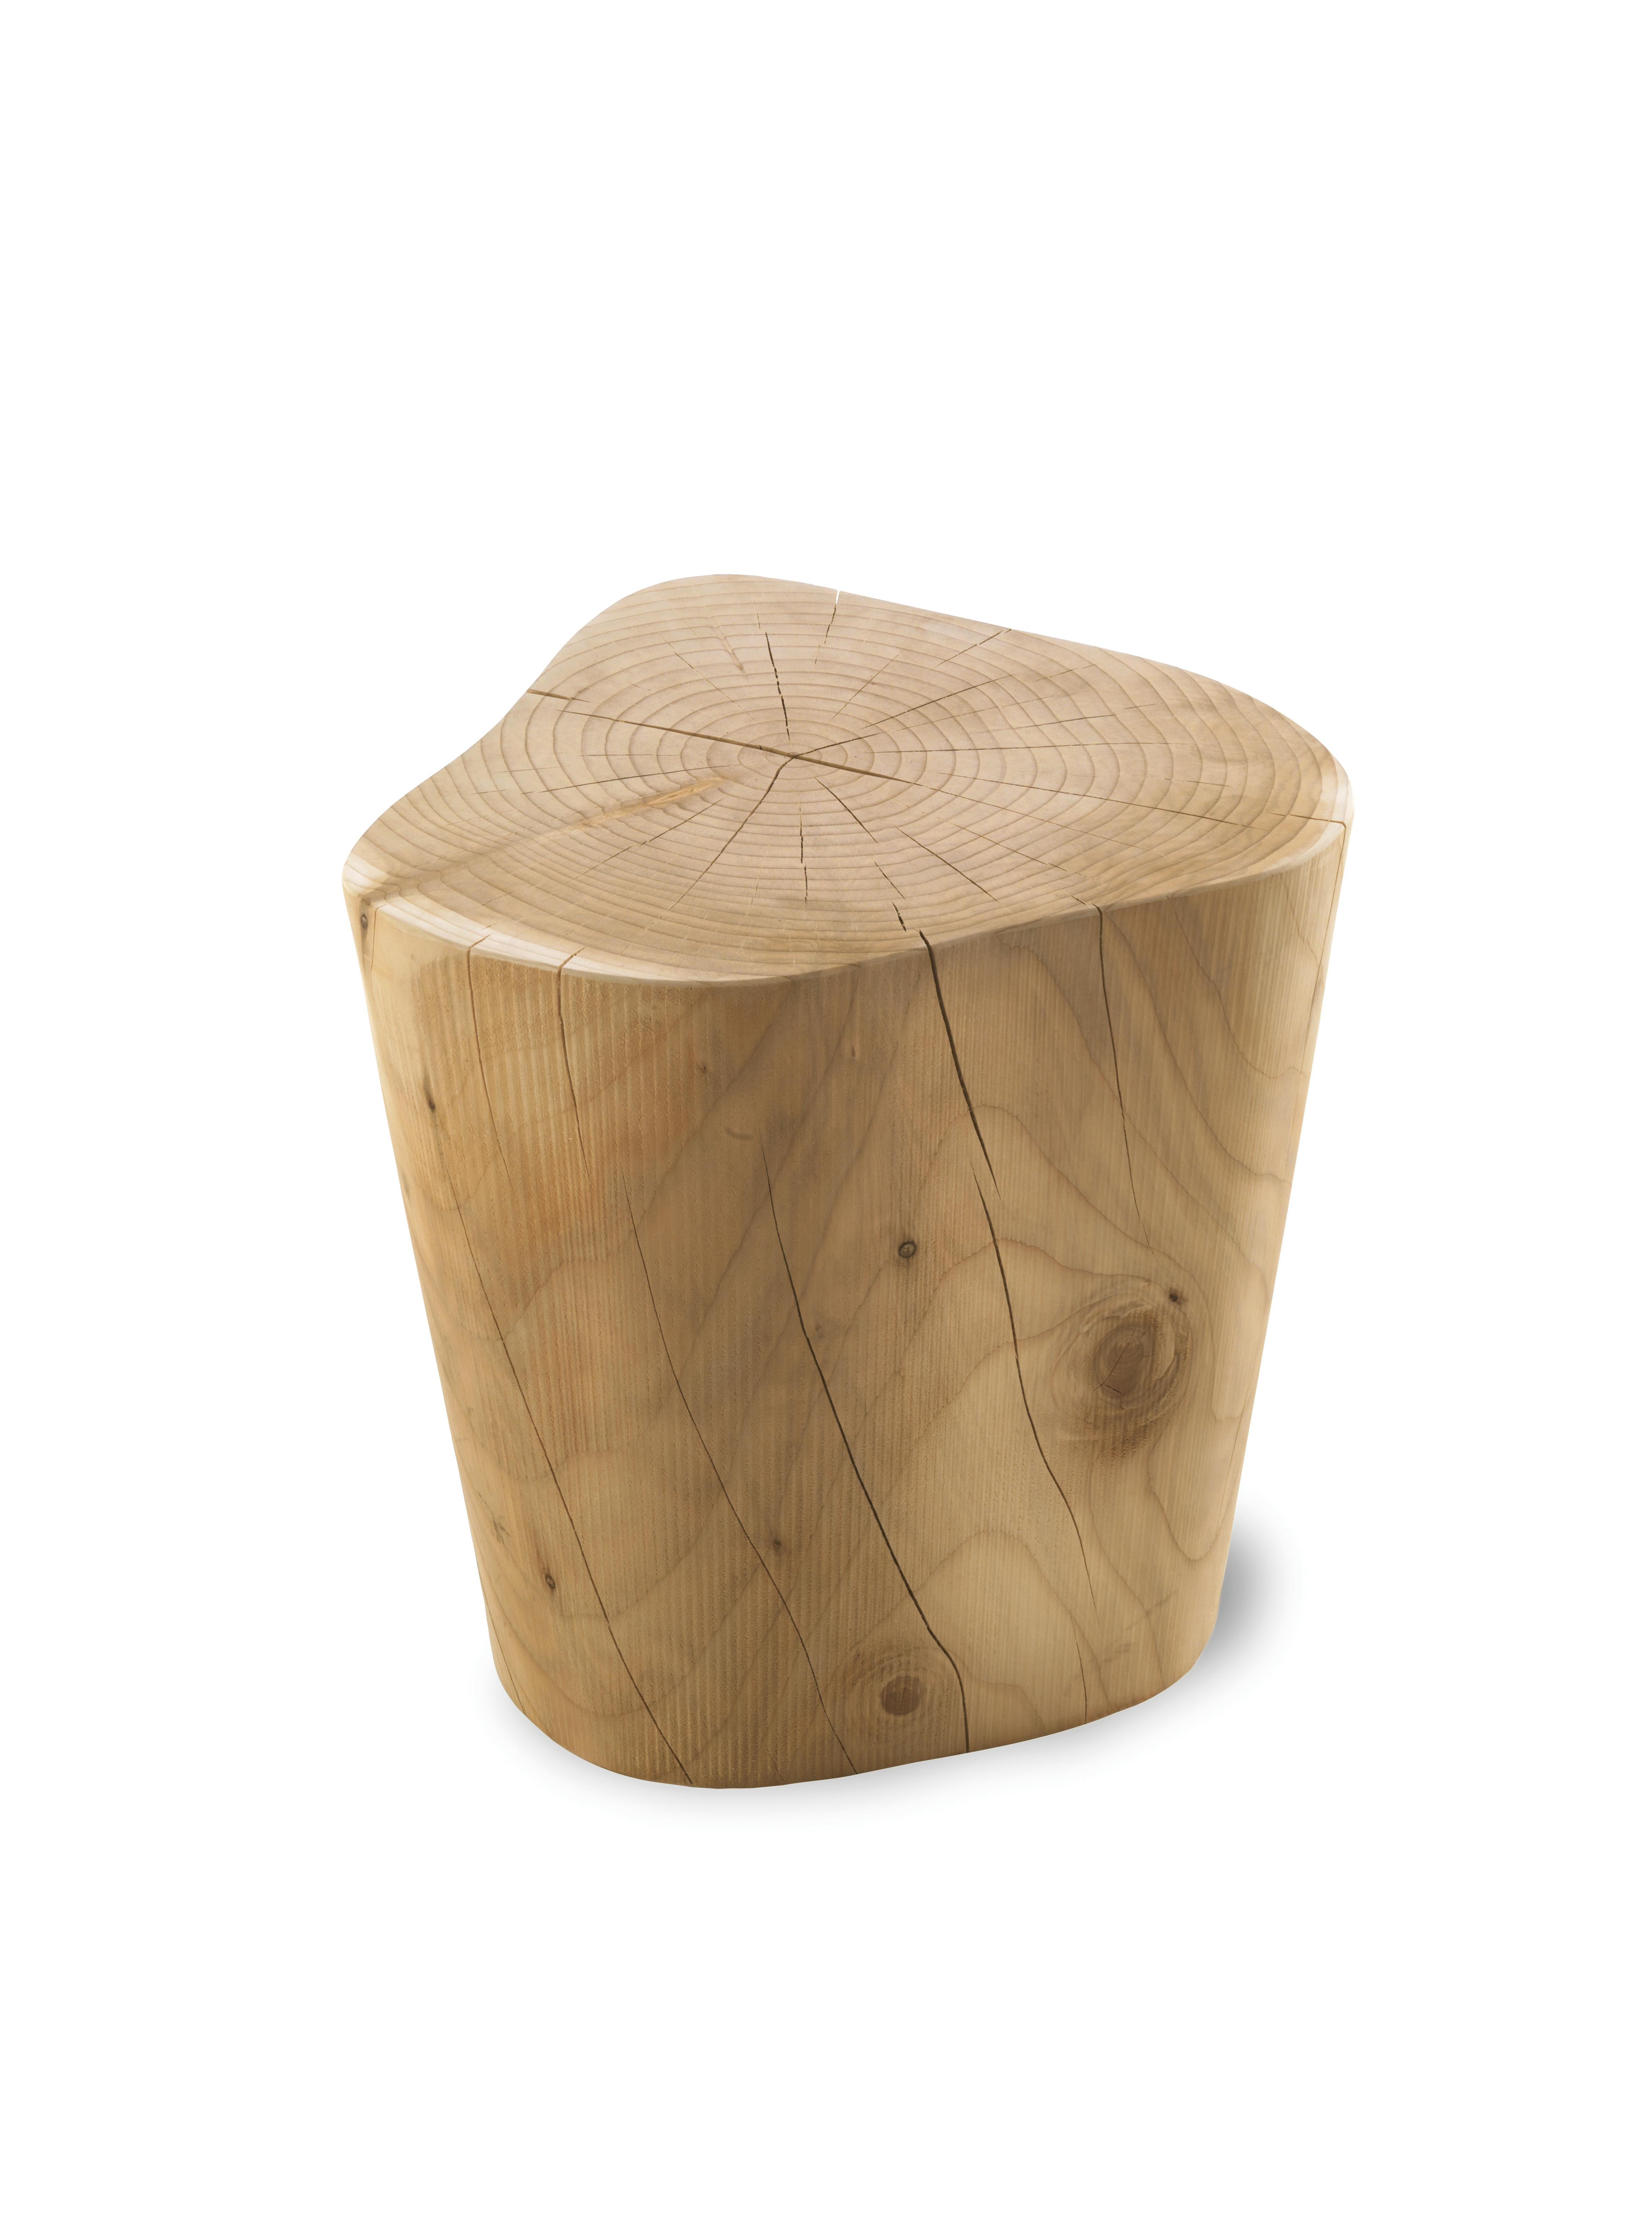 Stool made from a single block of scented cedar that is a tribute to a traditional Milanese dish.